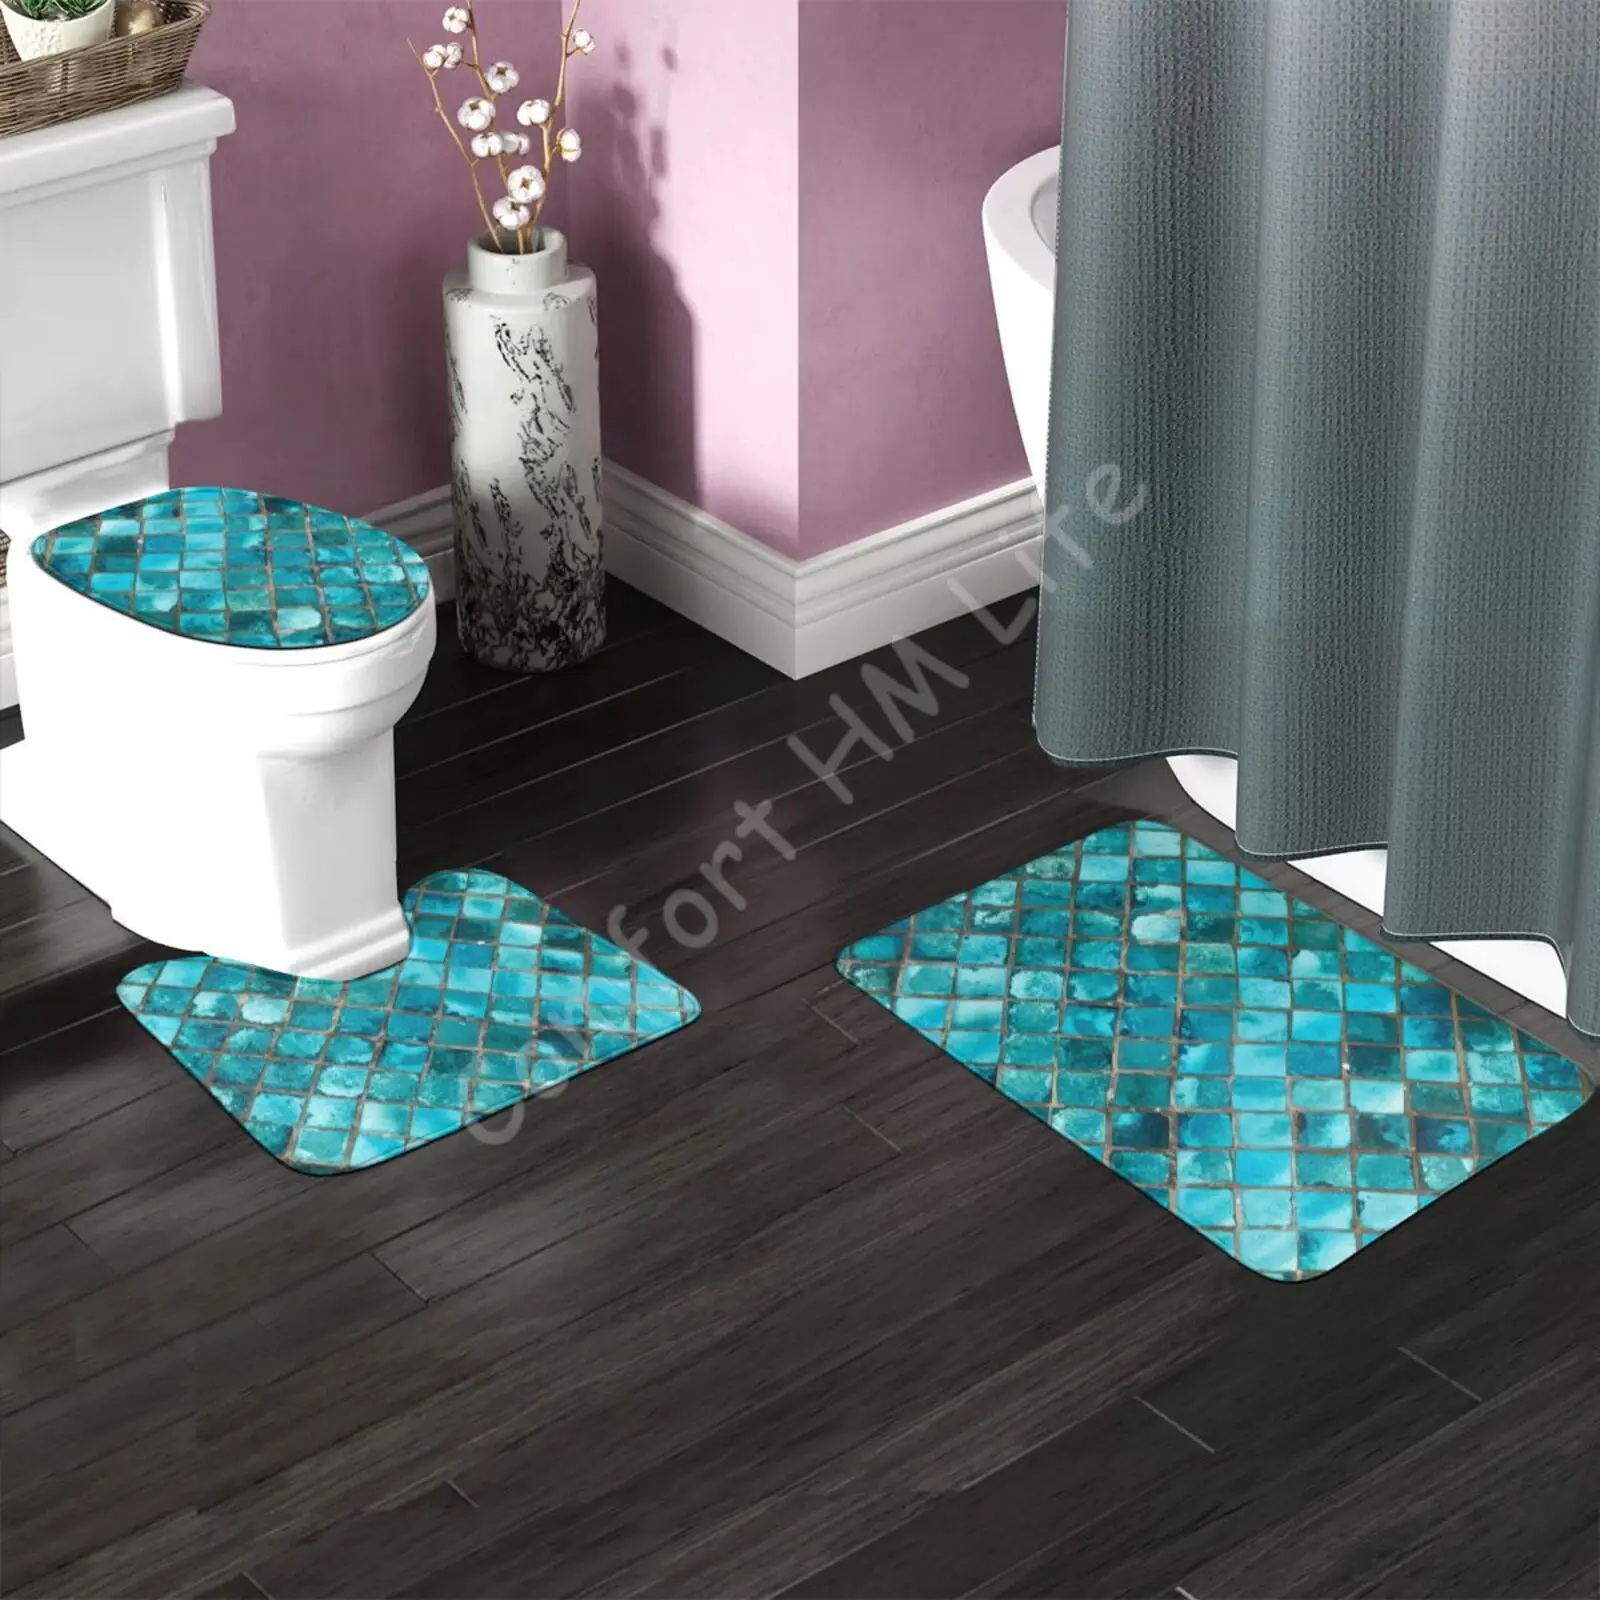 3-PC Rock Turquoise High Quality Memory Foam Bathroom Bath Rug Set Washable  Anti Slip Rug, Contour Mat and Toilet Seat Lid Cover with Non-Skid Rubber